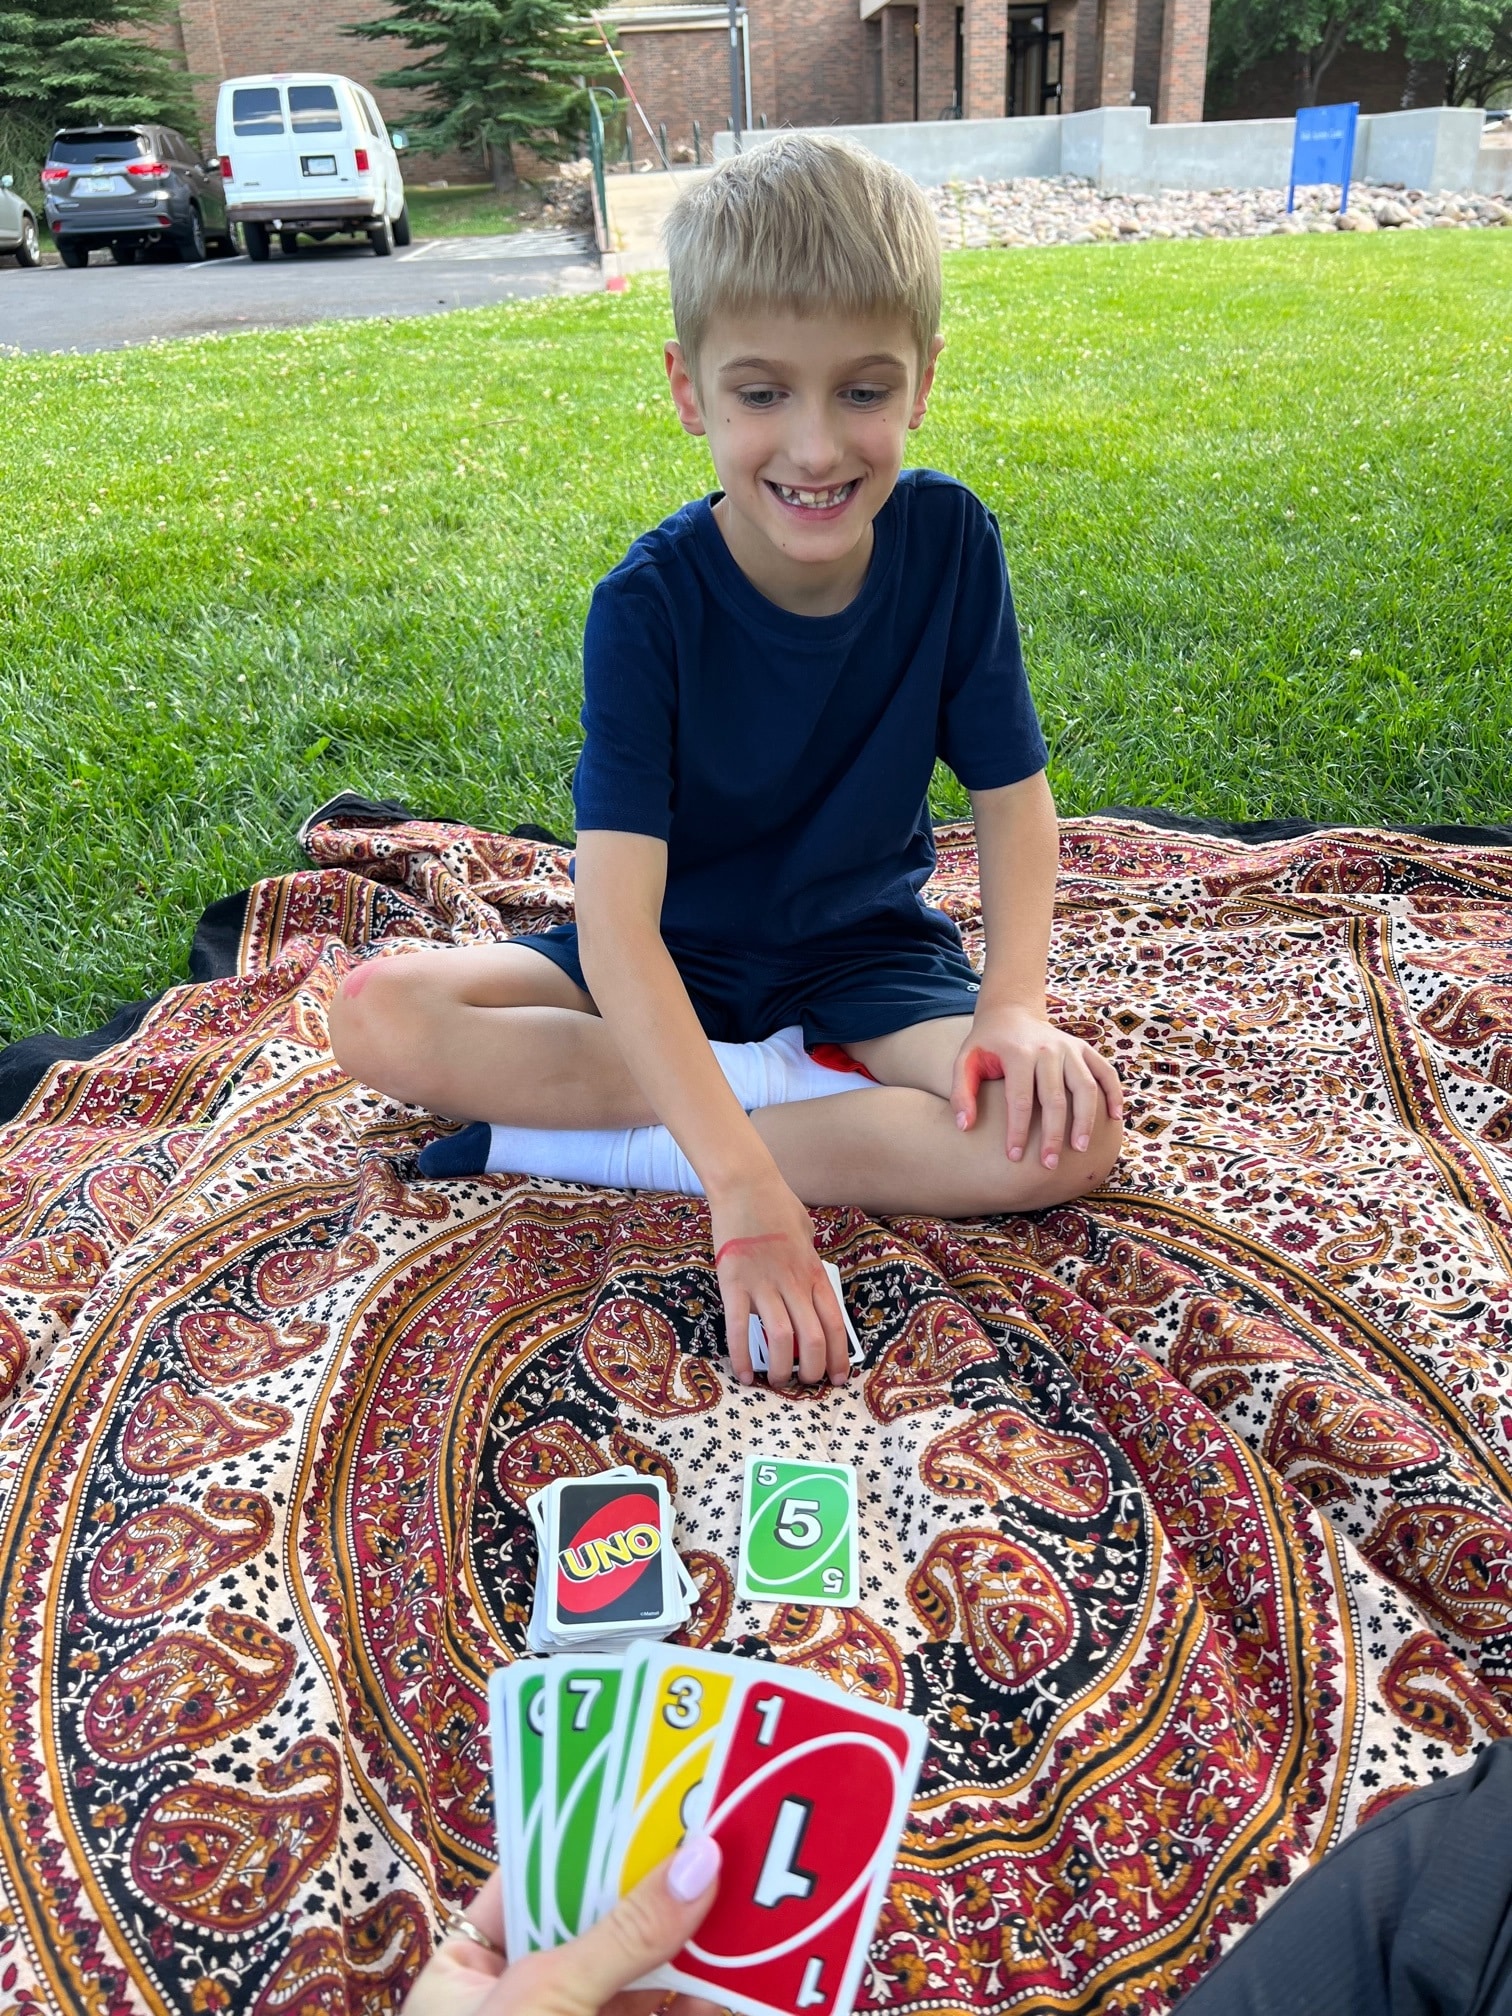 Jayden, a camper at NAU's Camp Chit-Chat, smiling during a game of Uno.